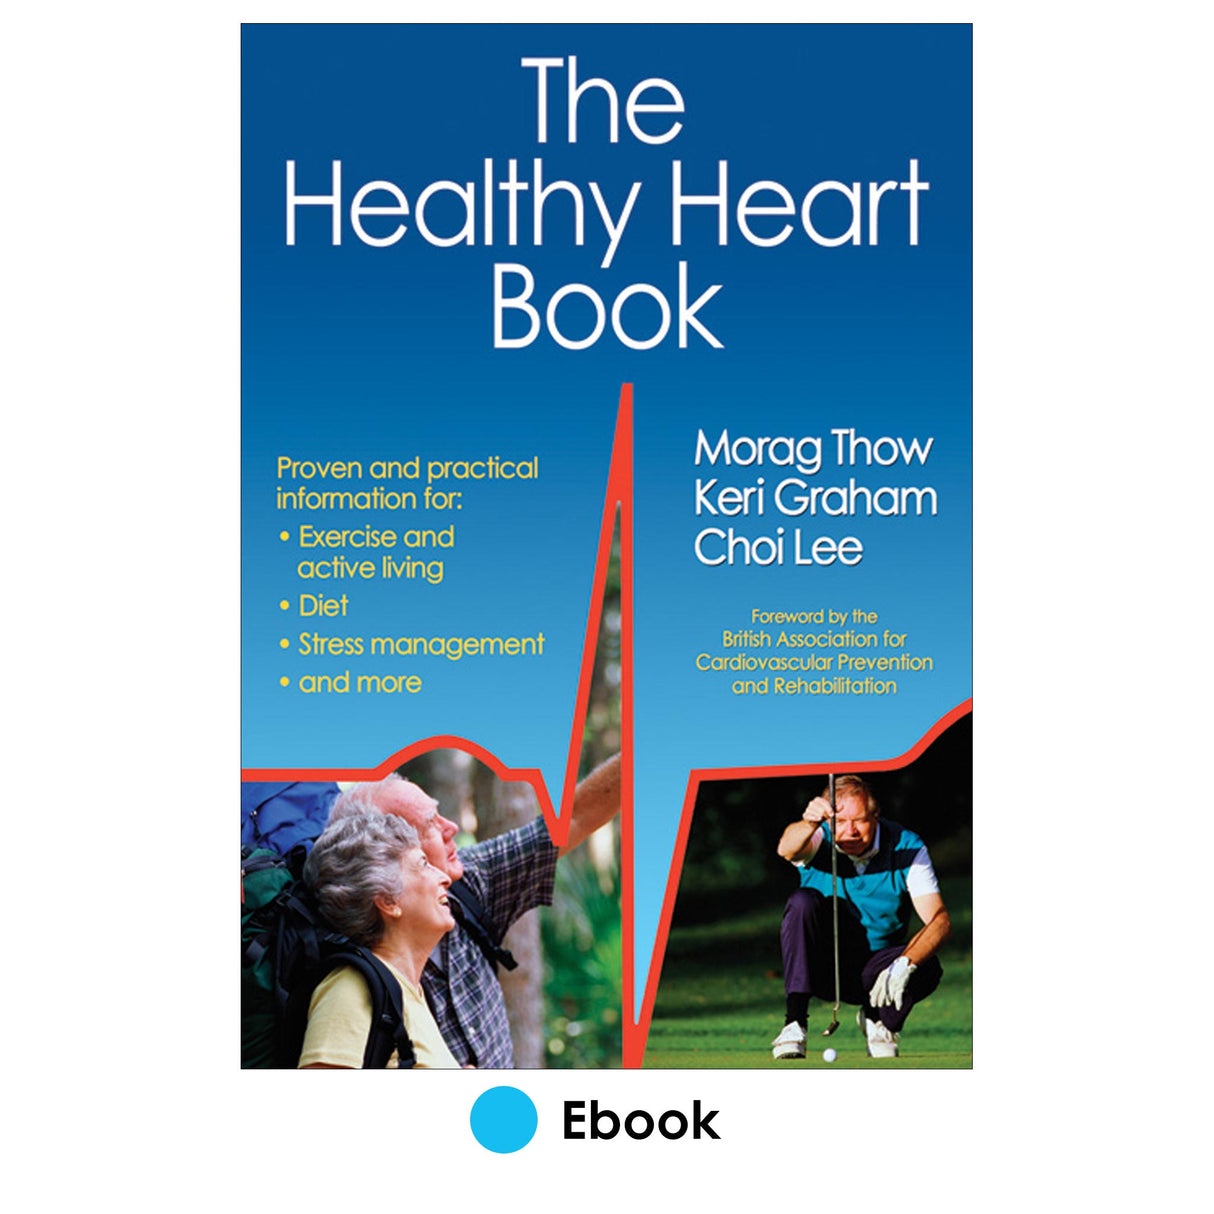 Healthy Heart Book PDF, The